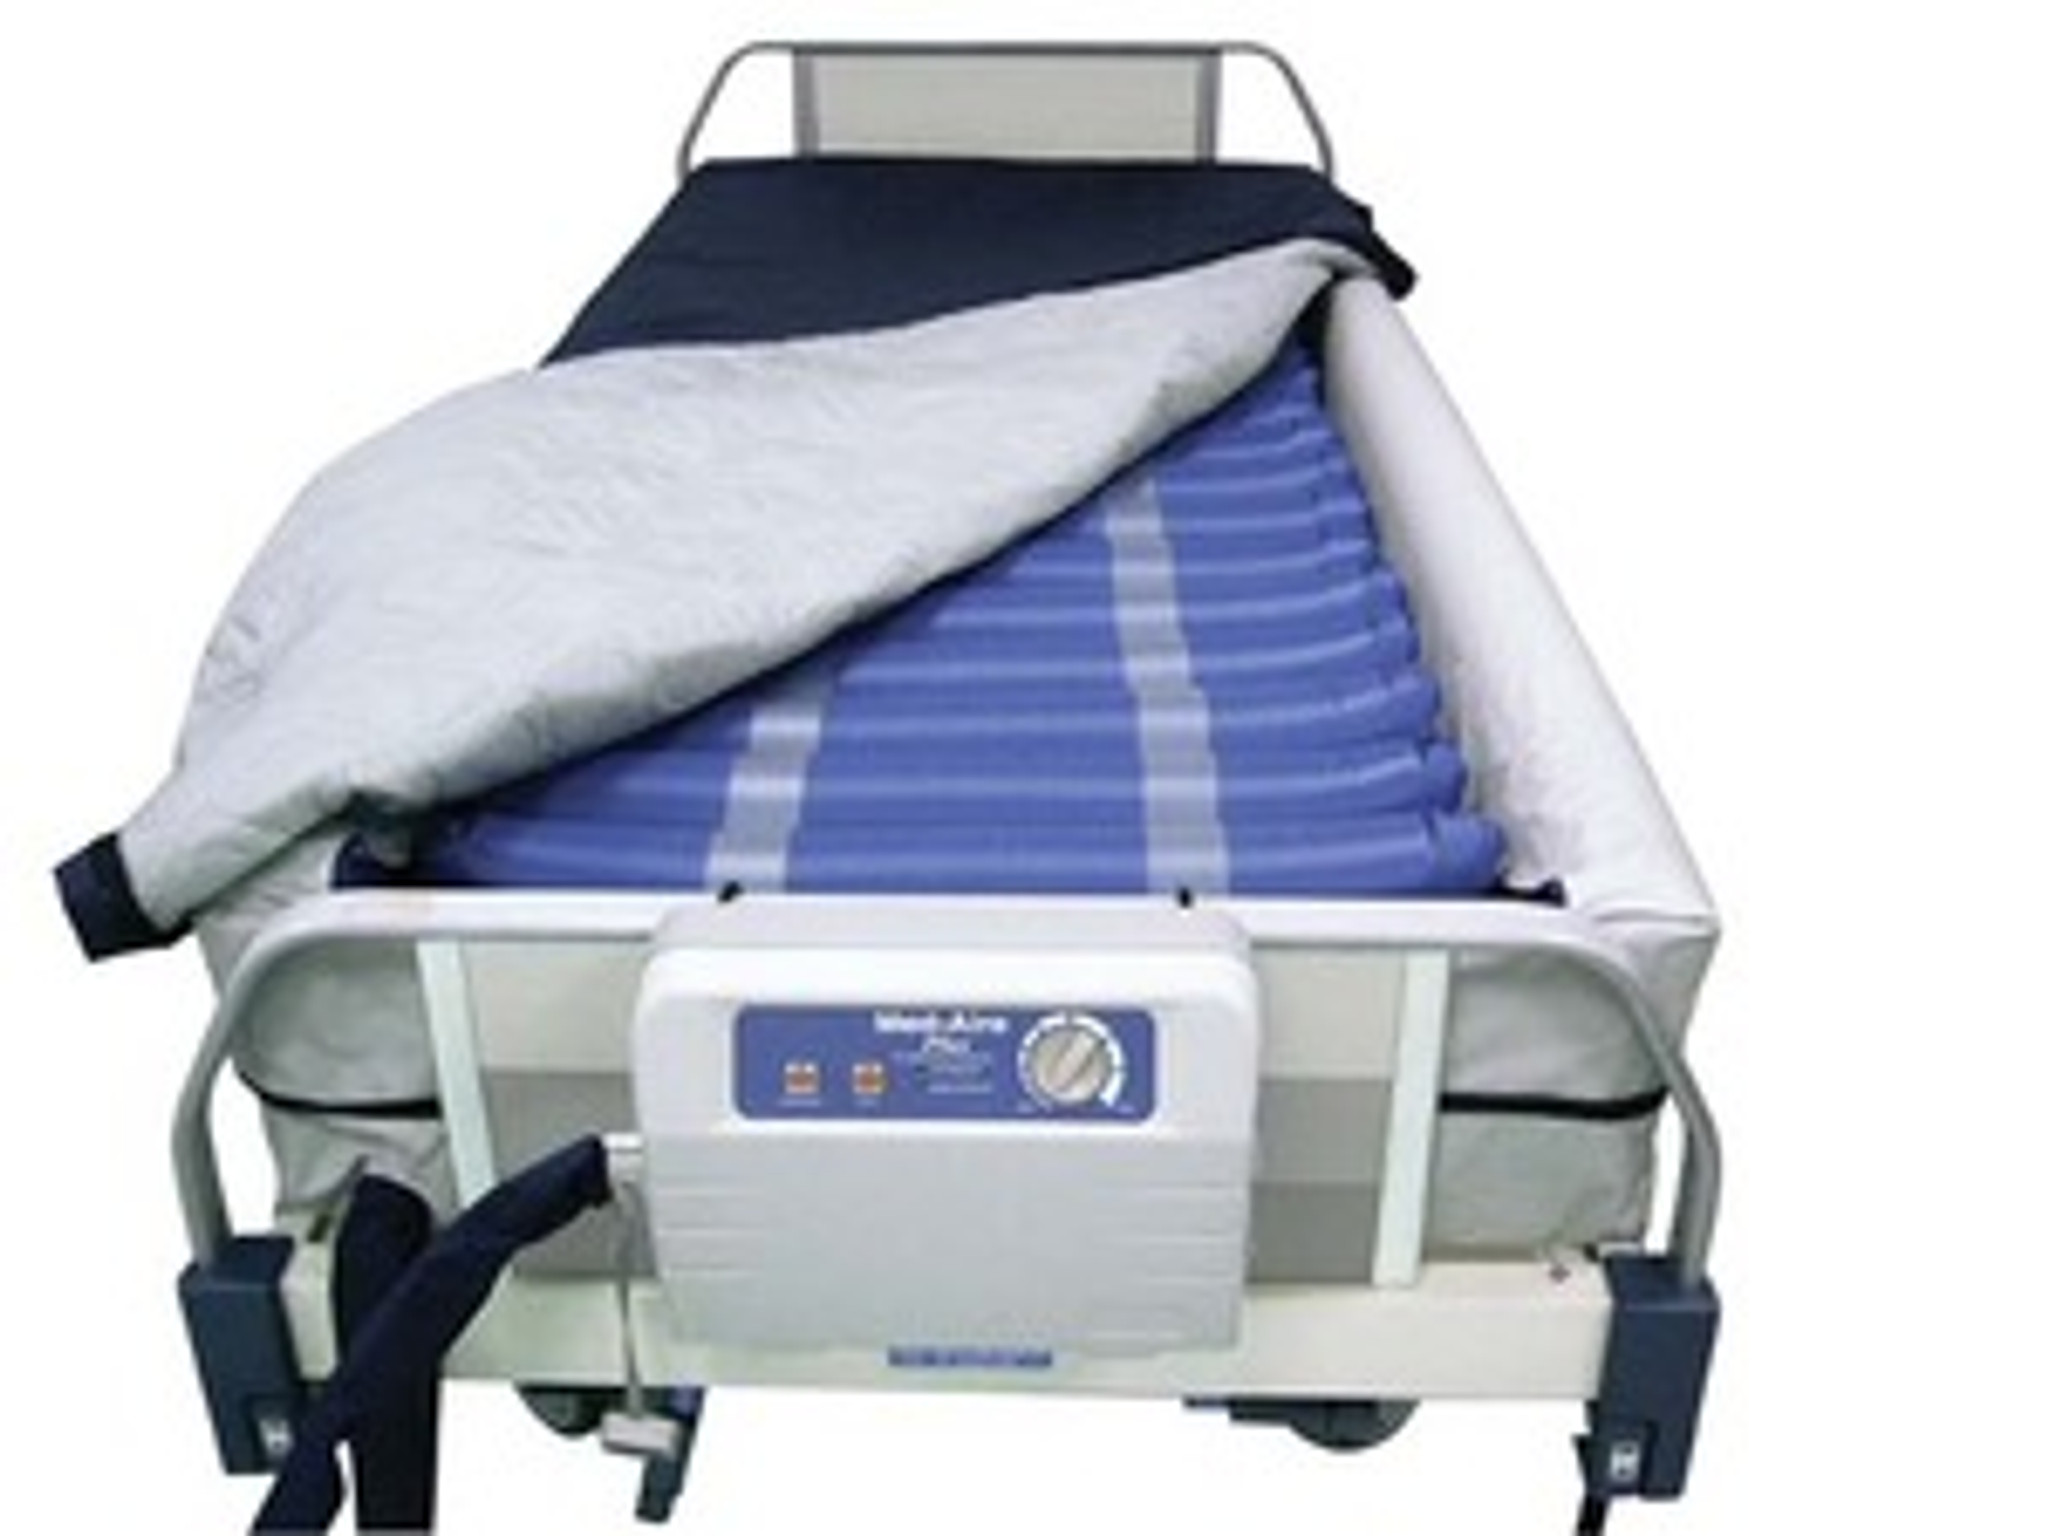 med-aire alternating pressure mattress replacement system